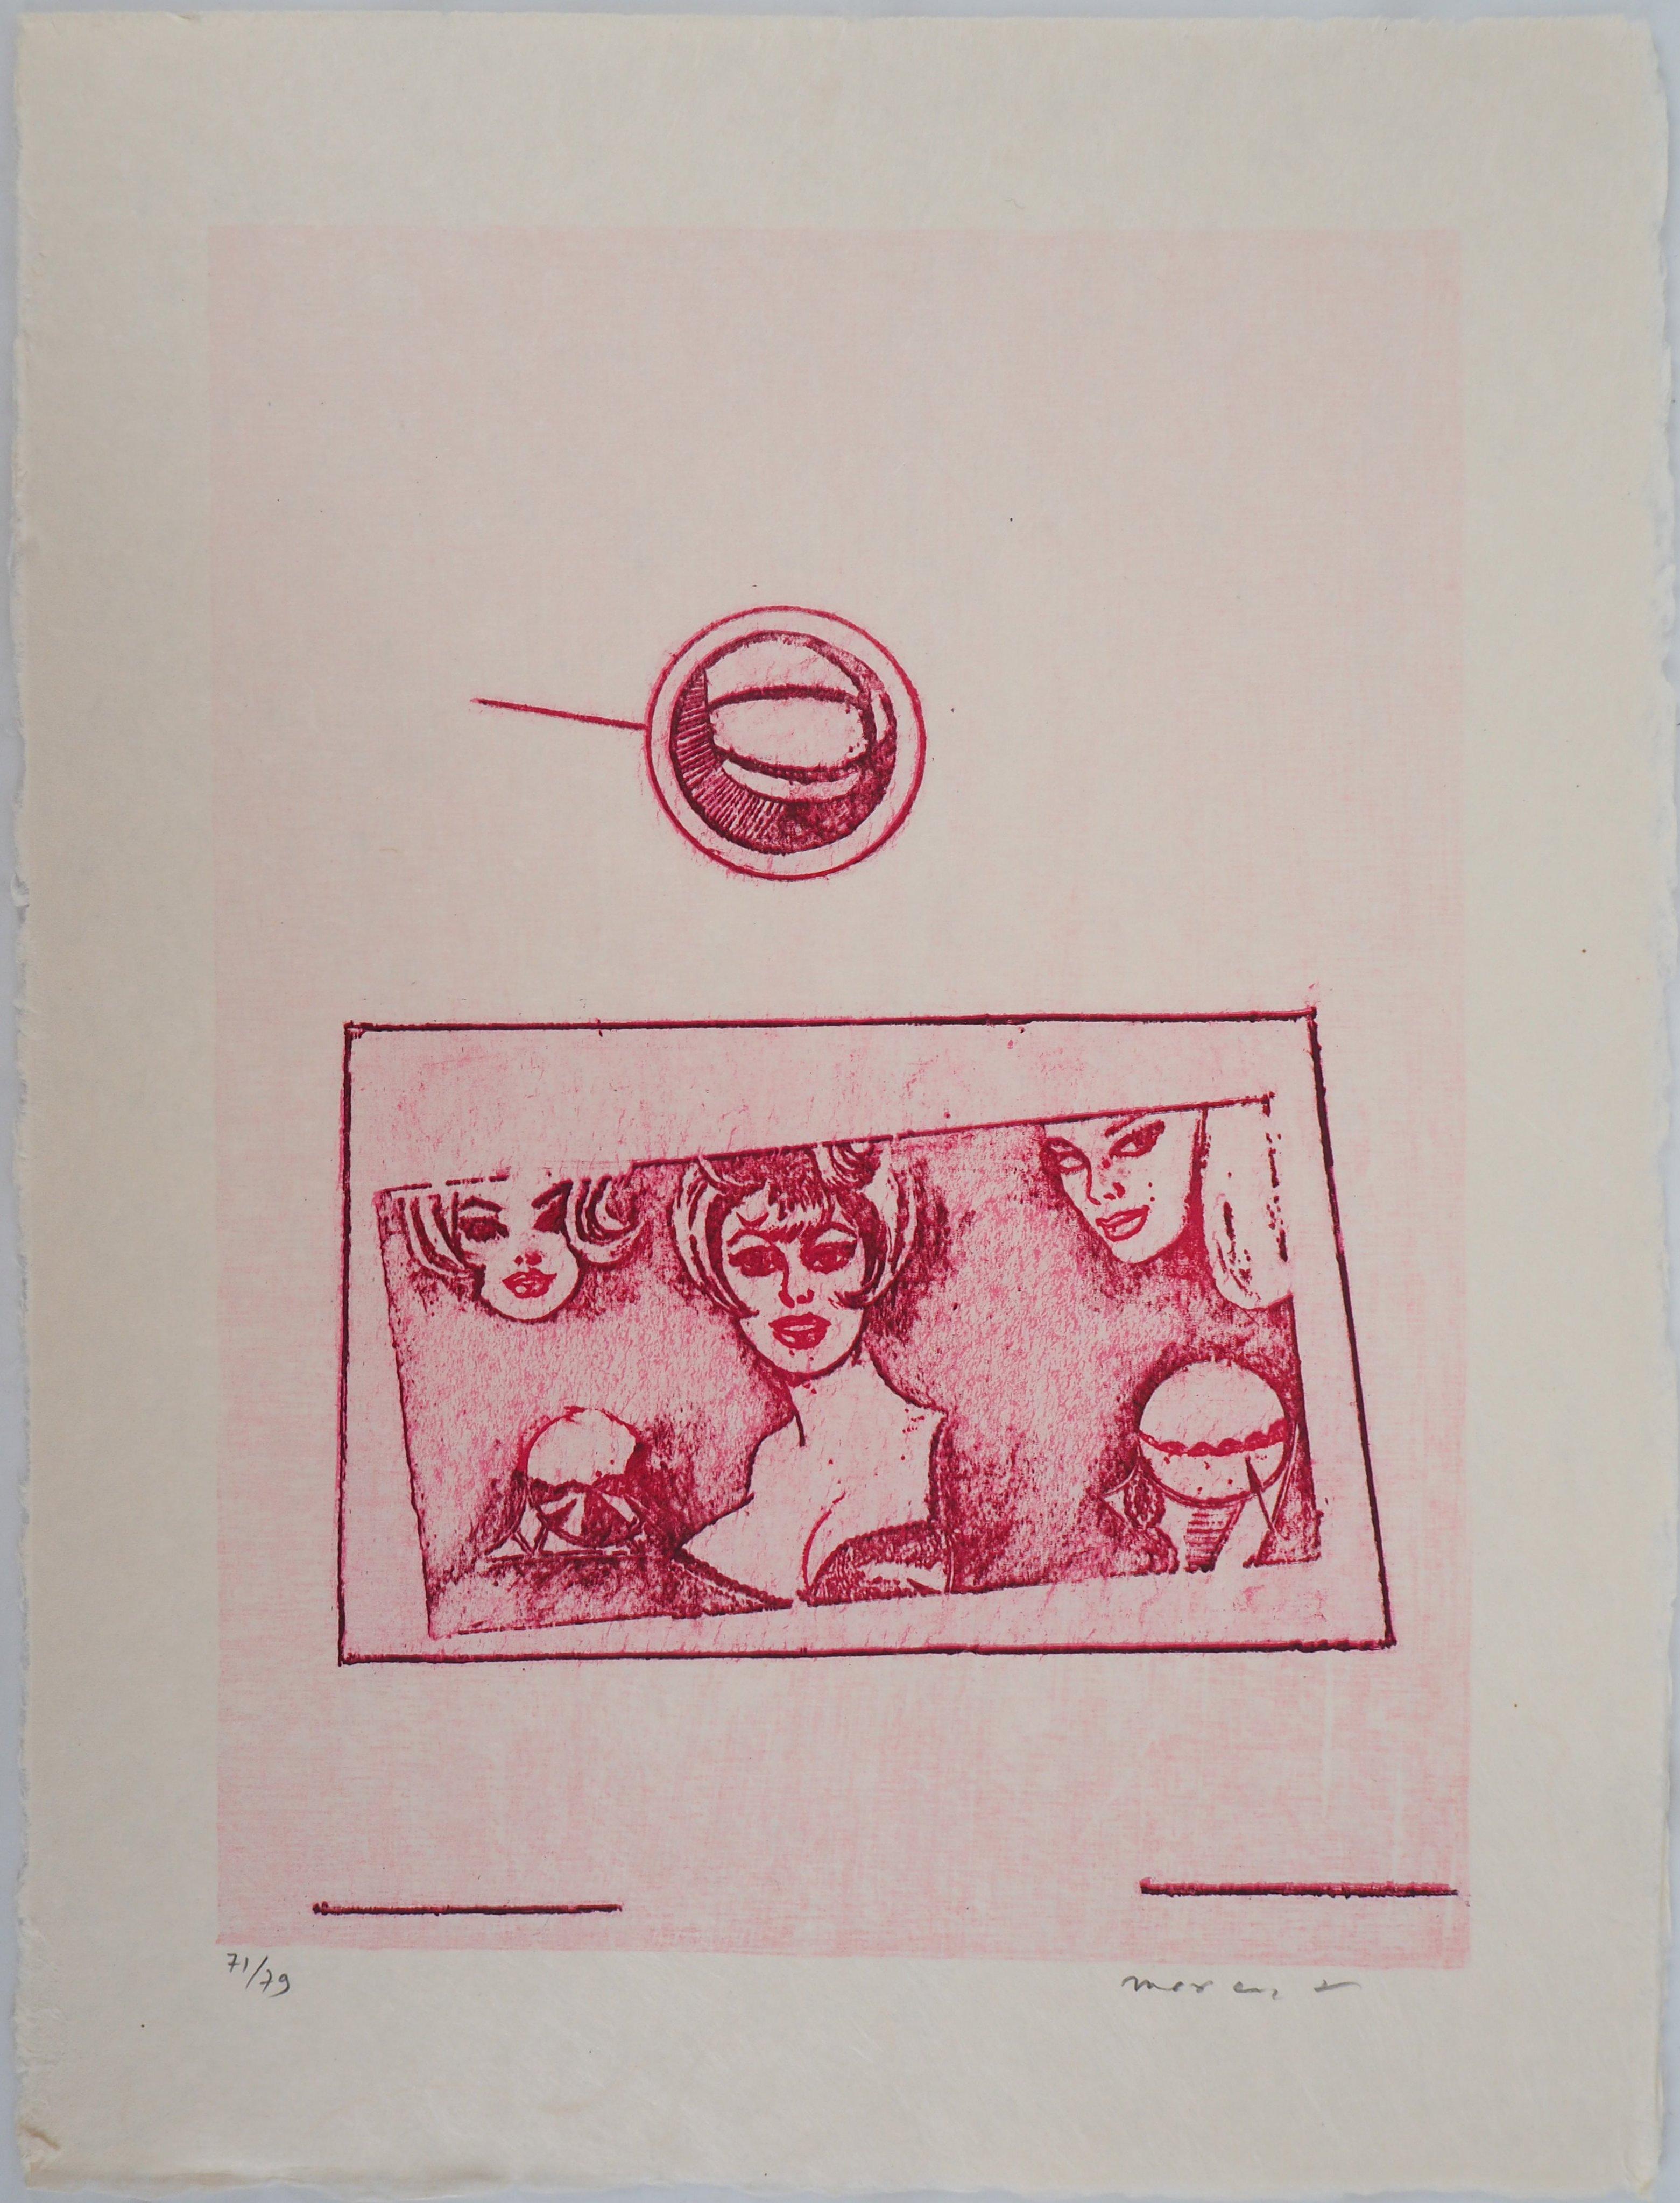 Pink Women - Original Lithograph Handsigned and limited 79 copies - Mourlot 1972 - Print by Max Ernst